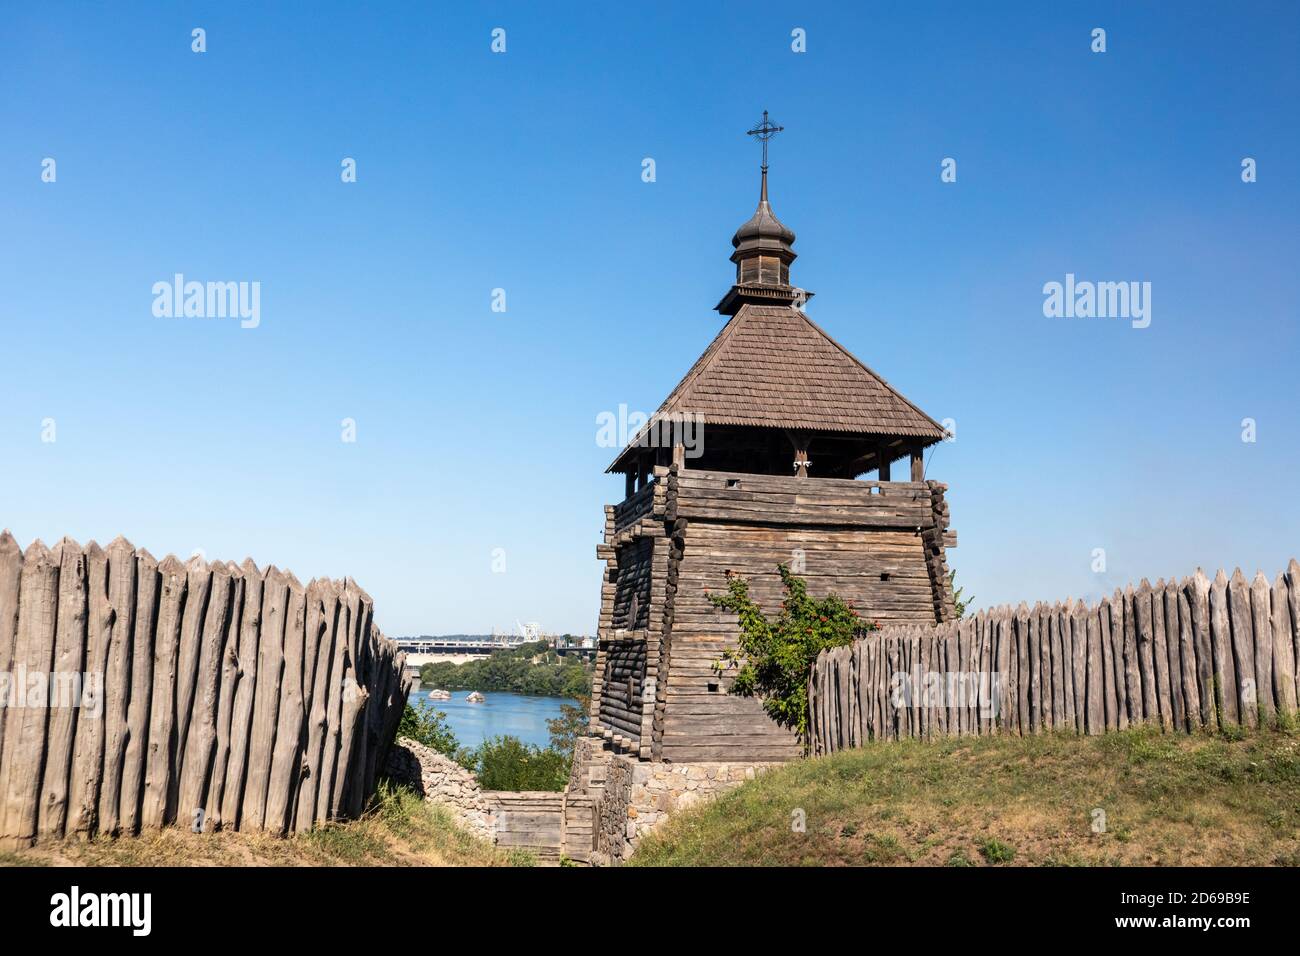 Watchtower in wooden medieval Zaporozhian Sich historical complex, view on DneproGES power station with blue clear bright sky. Khortytsia island on Dn Stock Photo